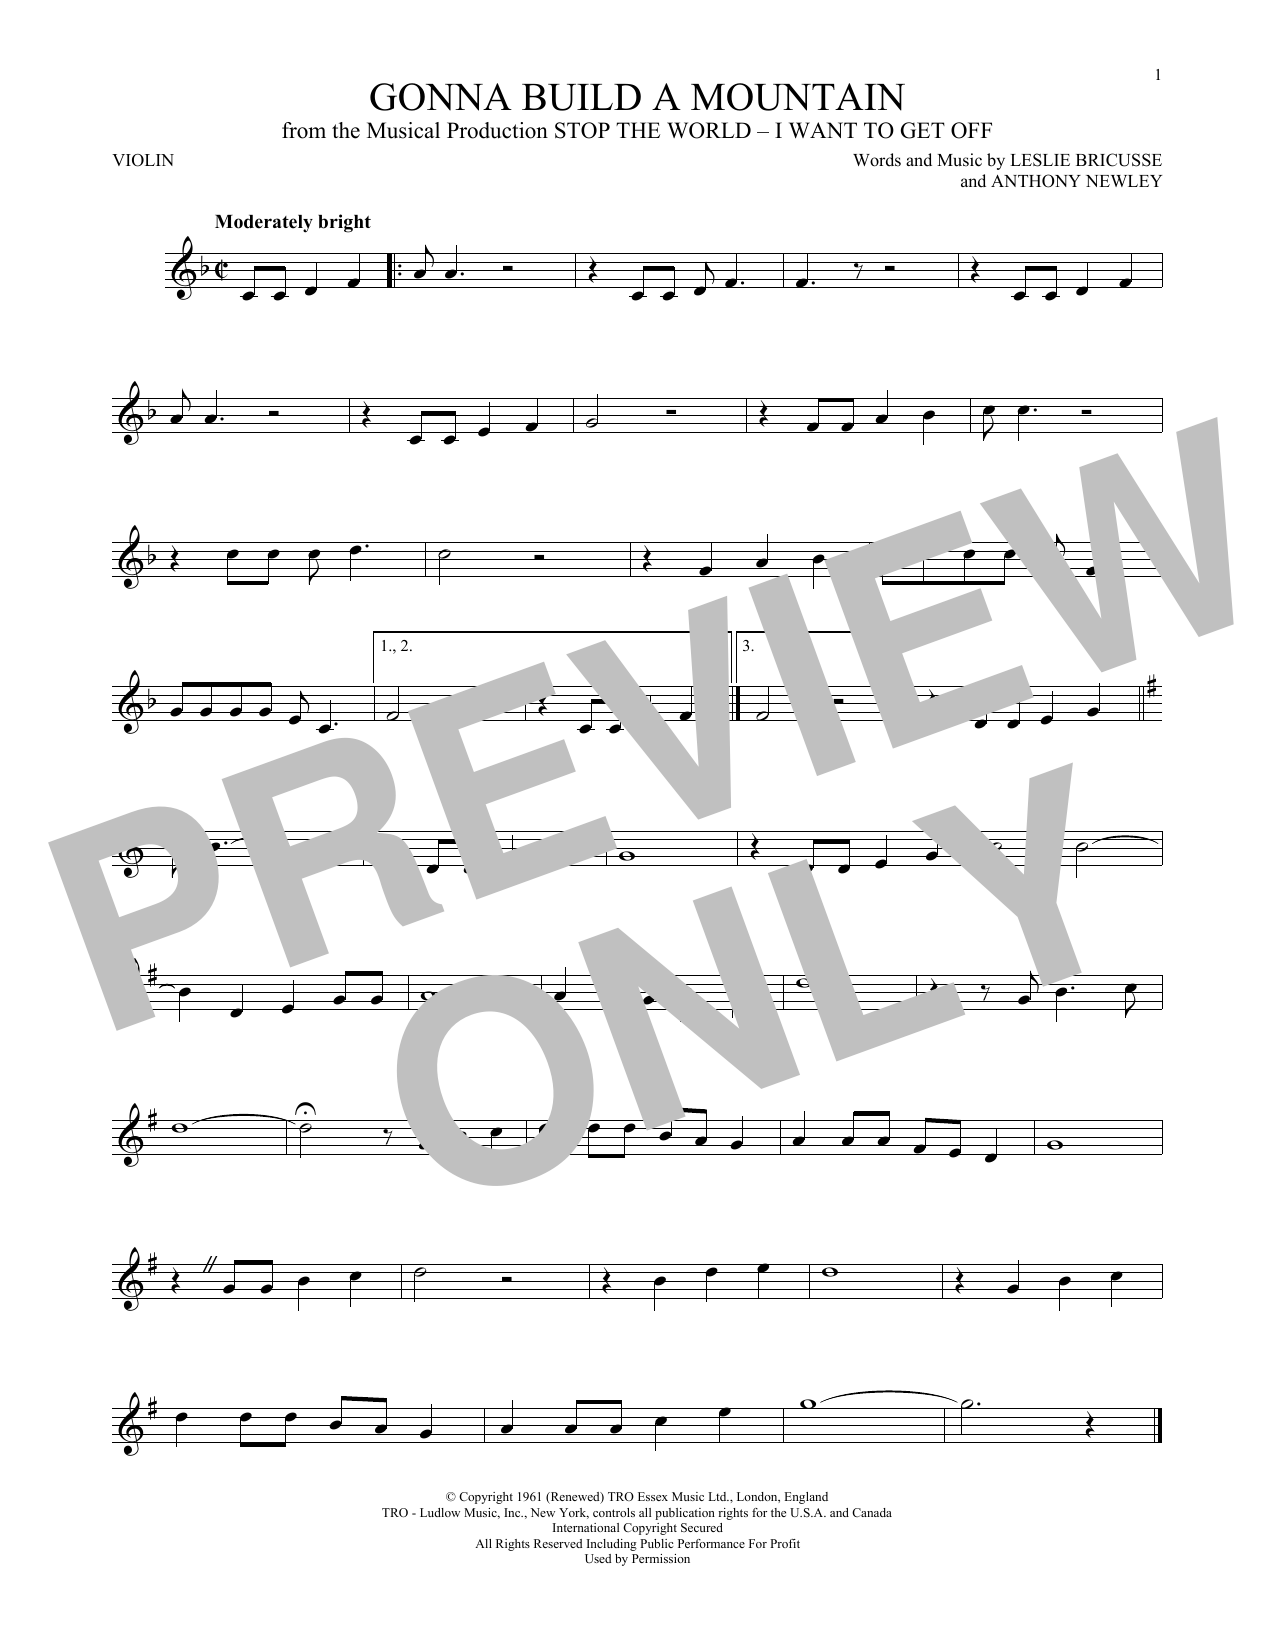 Download Leslie Bricusse Gonna Build A Mountain Sheet Music